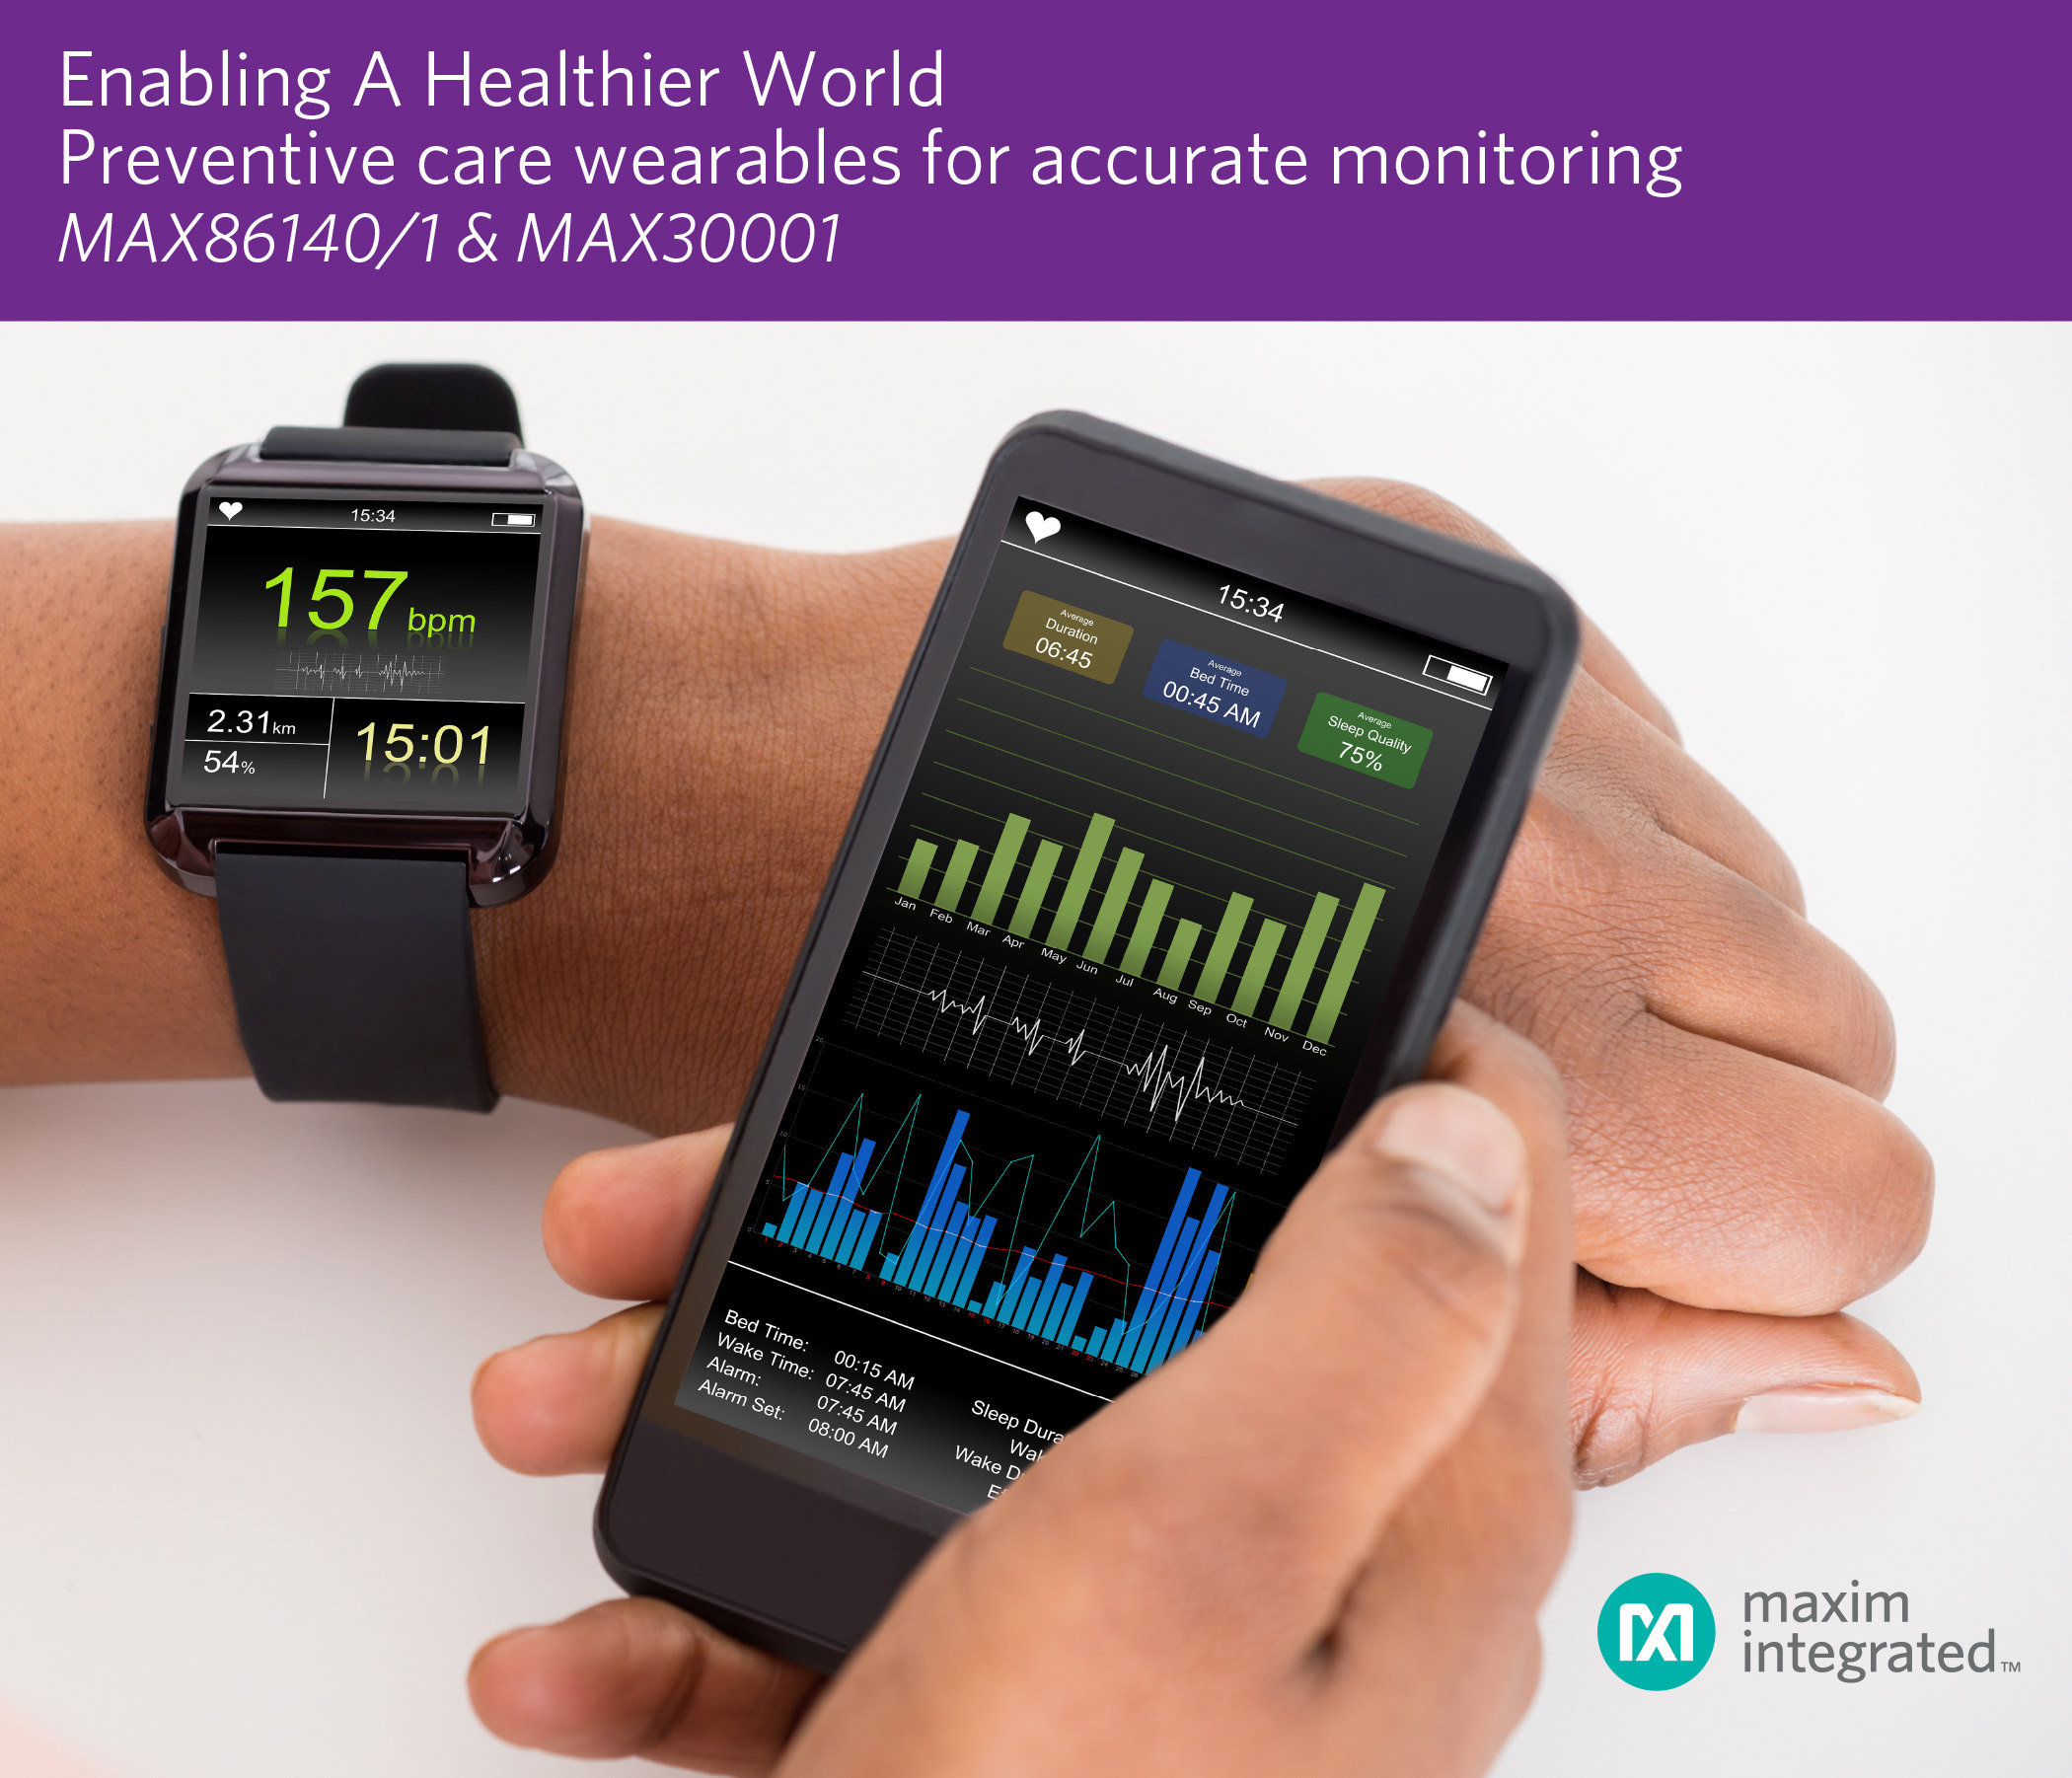 Optical Pulse Oximeter/Heart Rate Sensors and ECG & BioZ AFE Deliver Accurate, Continuous Monitoring in Compact, Low-Power Solutions